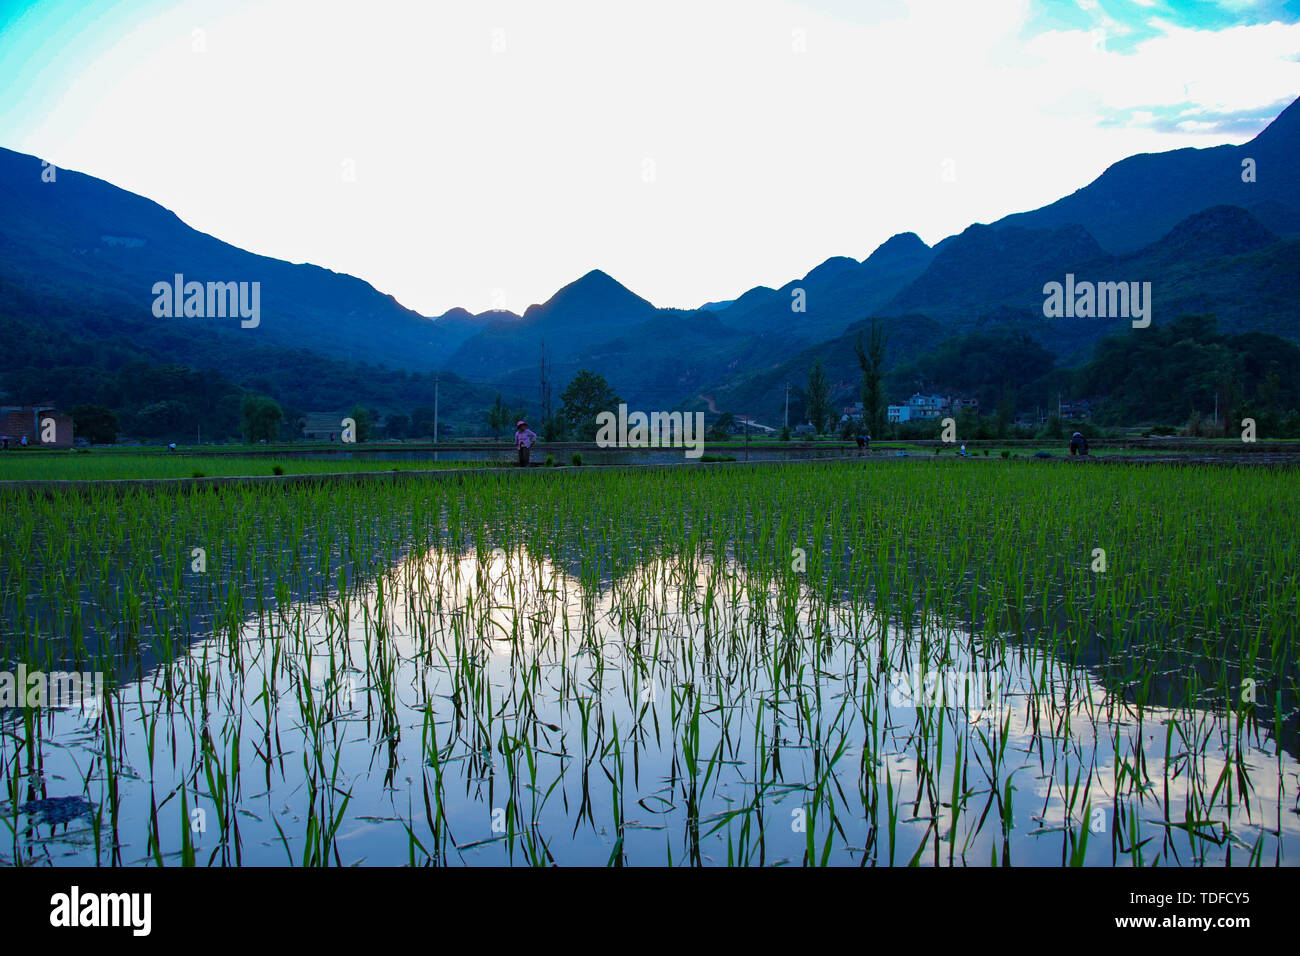 Filmed in Hale Village, Shizong County, Yunnan Province, the scenery of the Hale paddy field and the hard-working children of the Zhuang family are busy planting seedlings. Stock Photo